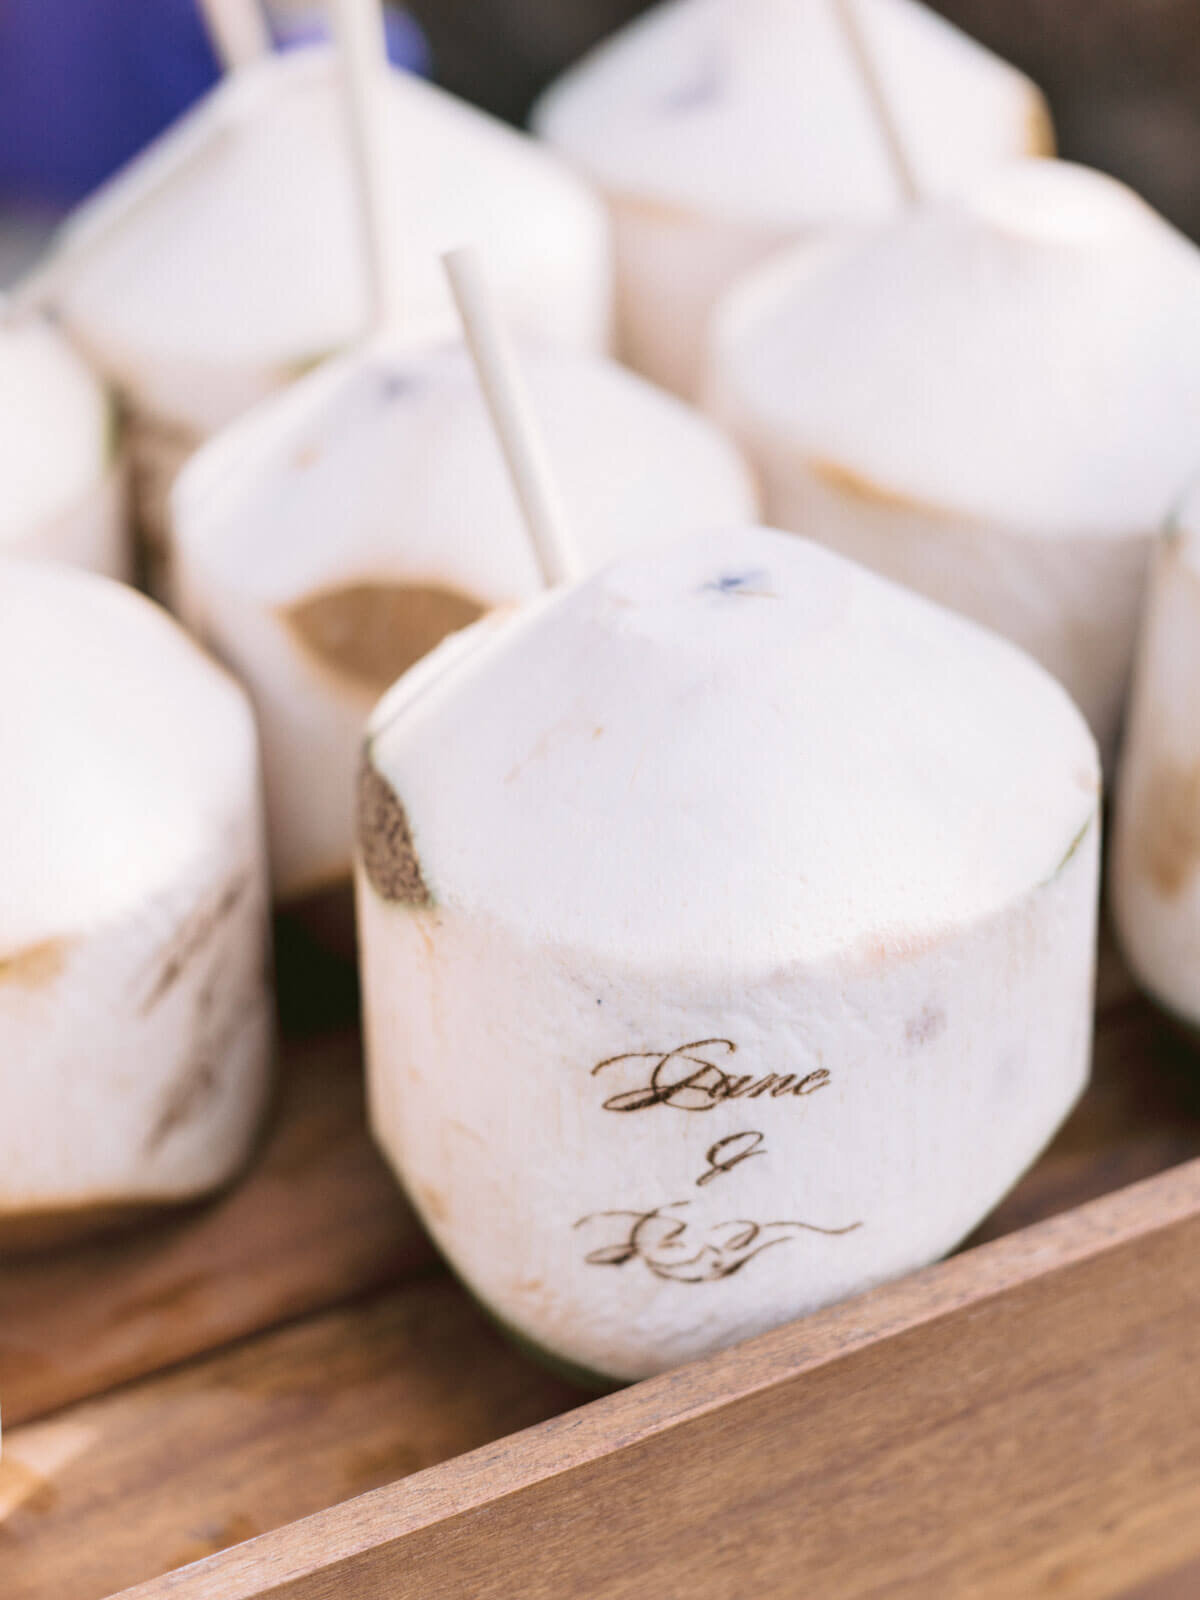 Coconuts ready to drink with a straw, are engraved with the bride and groom's names in Khayangan Estate, Bali, Indonesia.